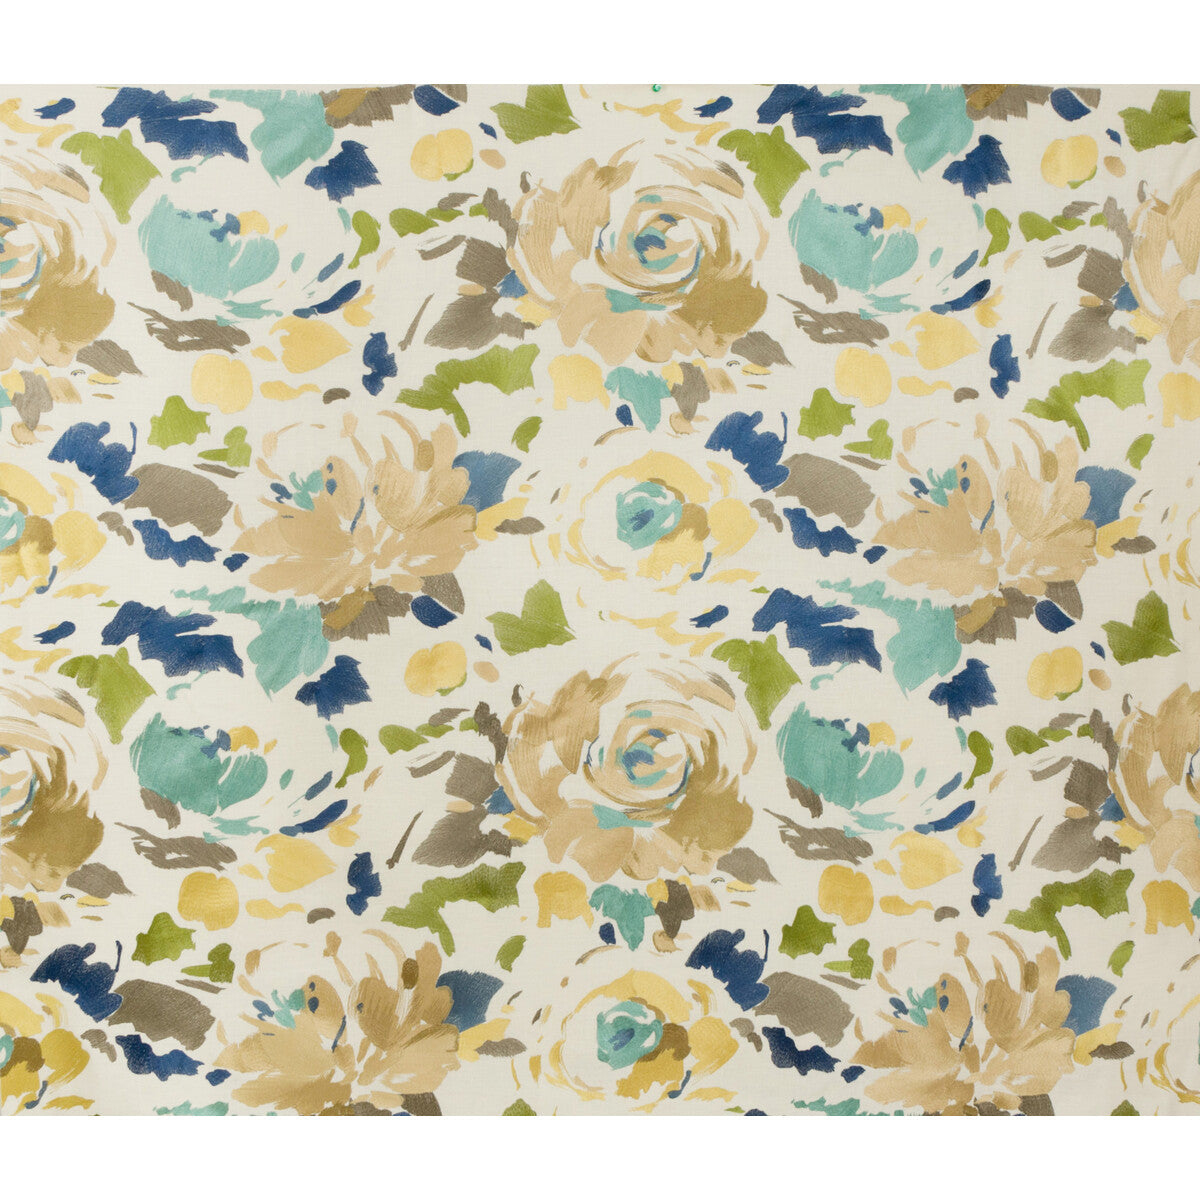 Kalos Emb fabric in teal/brass color - pattern GWF-3301.534.0 - by Lee Jofa Modern in the Kaleidoscope collection